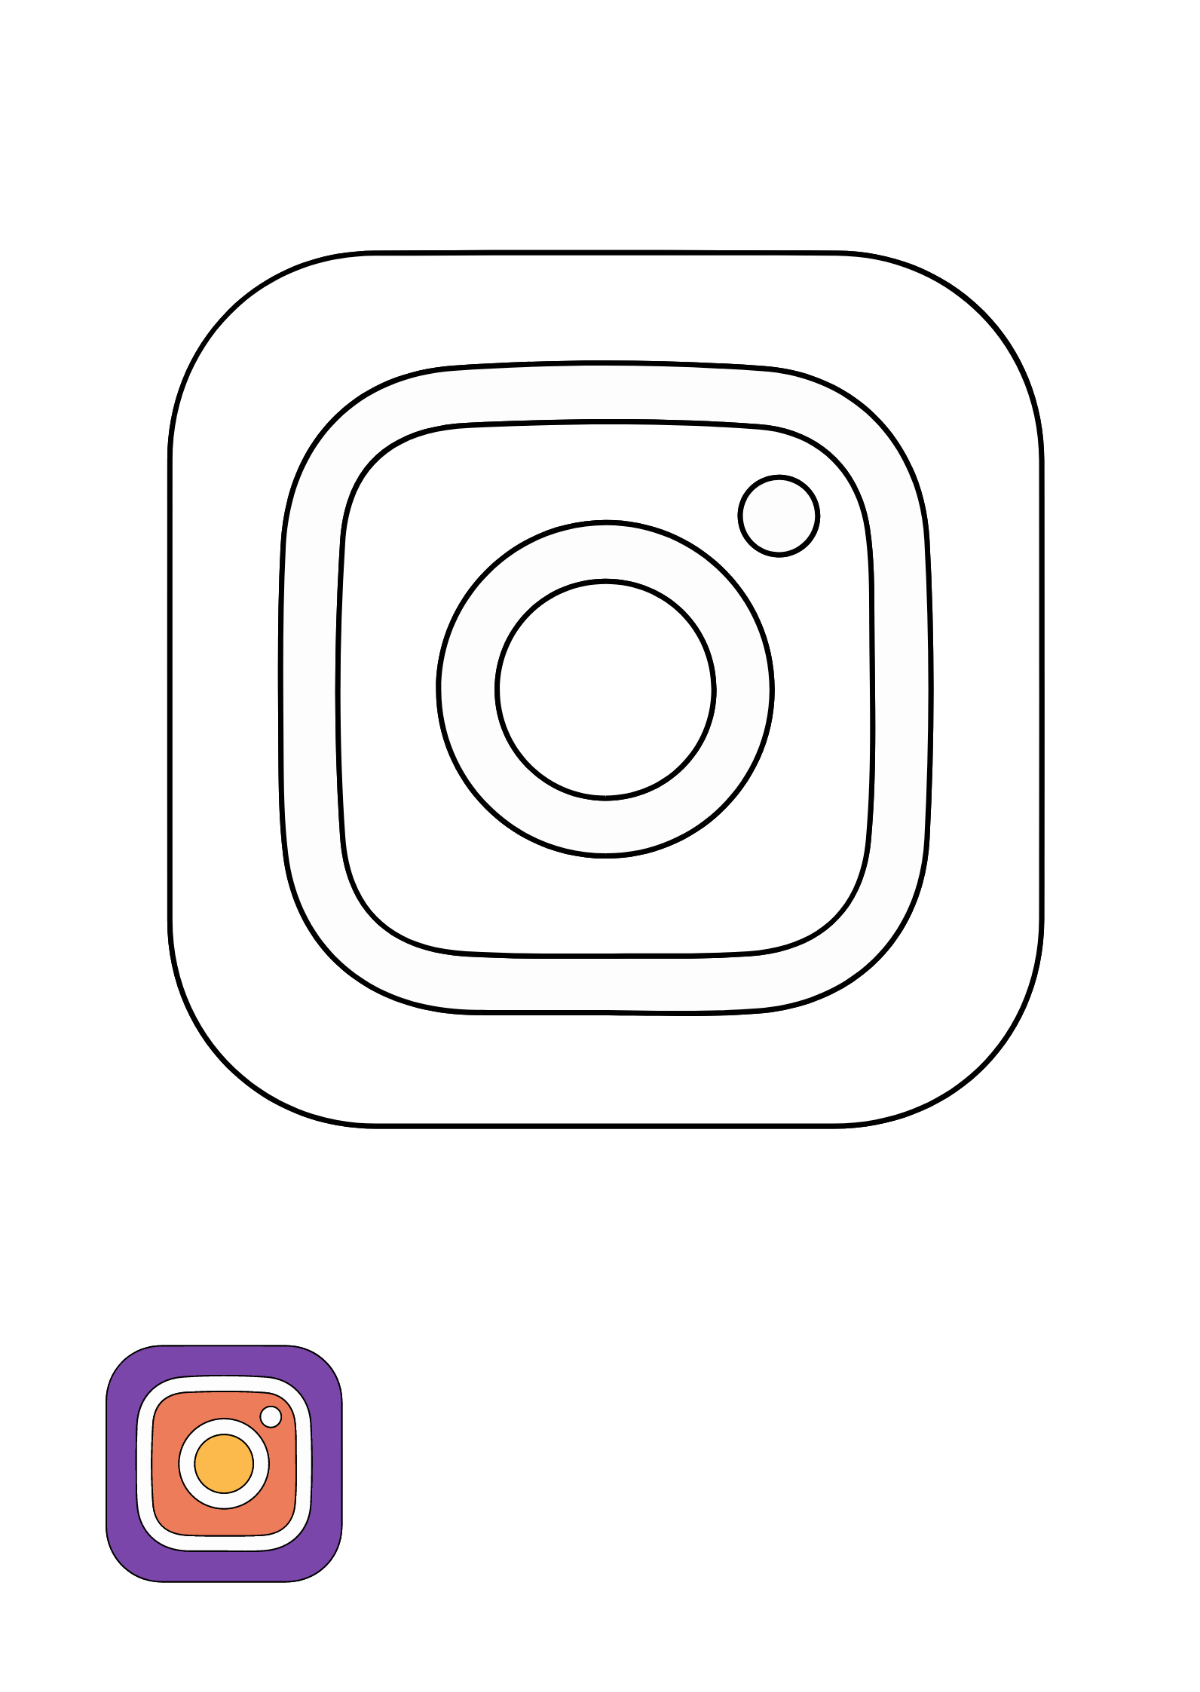 Instagram Logo Coloring Page Template